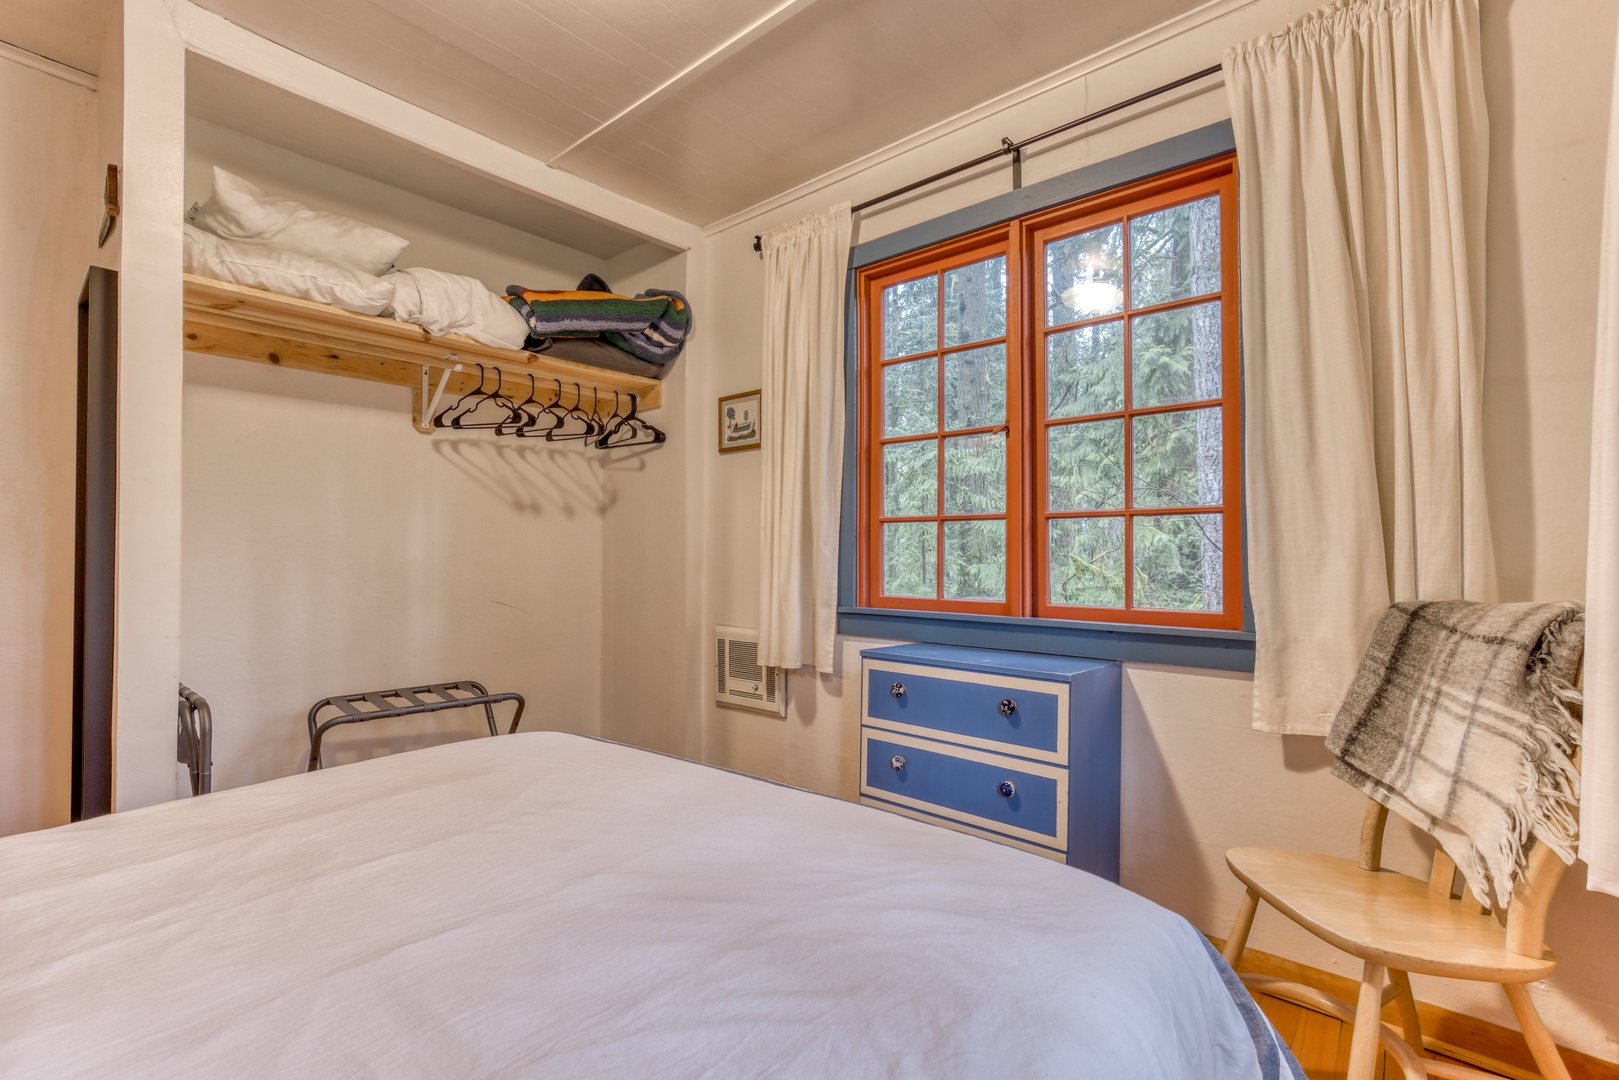 Brightwood Vacation Rentals, Springbrook Cabin - Beautiful primary bedroom with queen bed and view of the forest